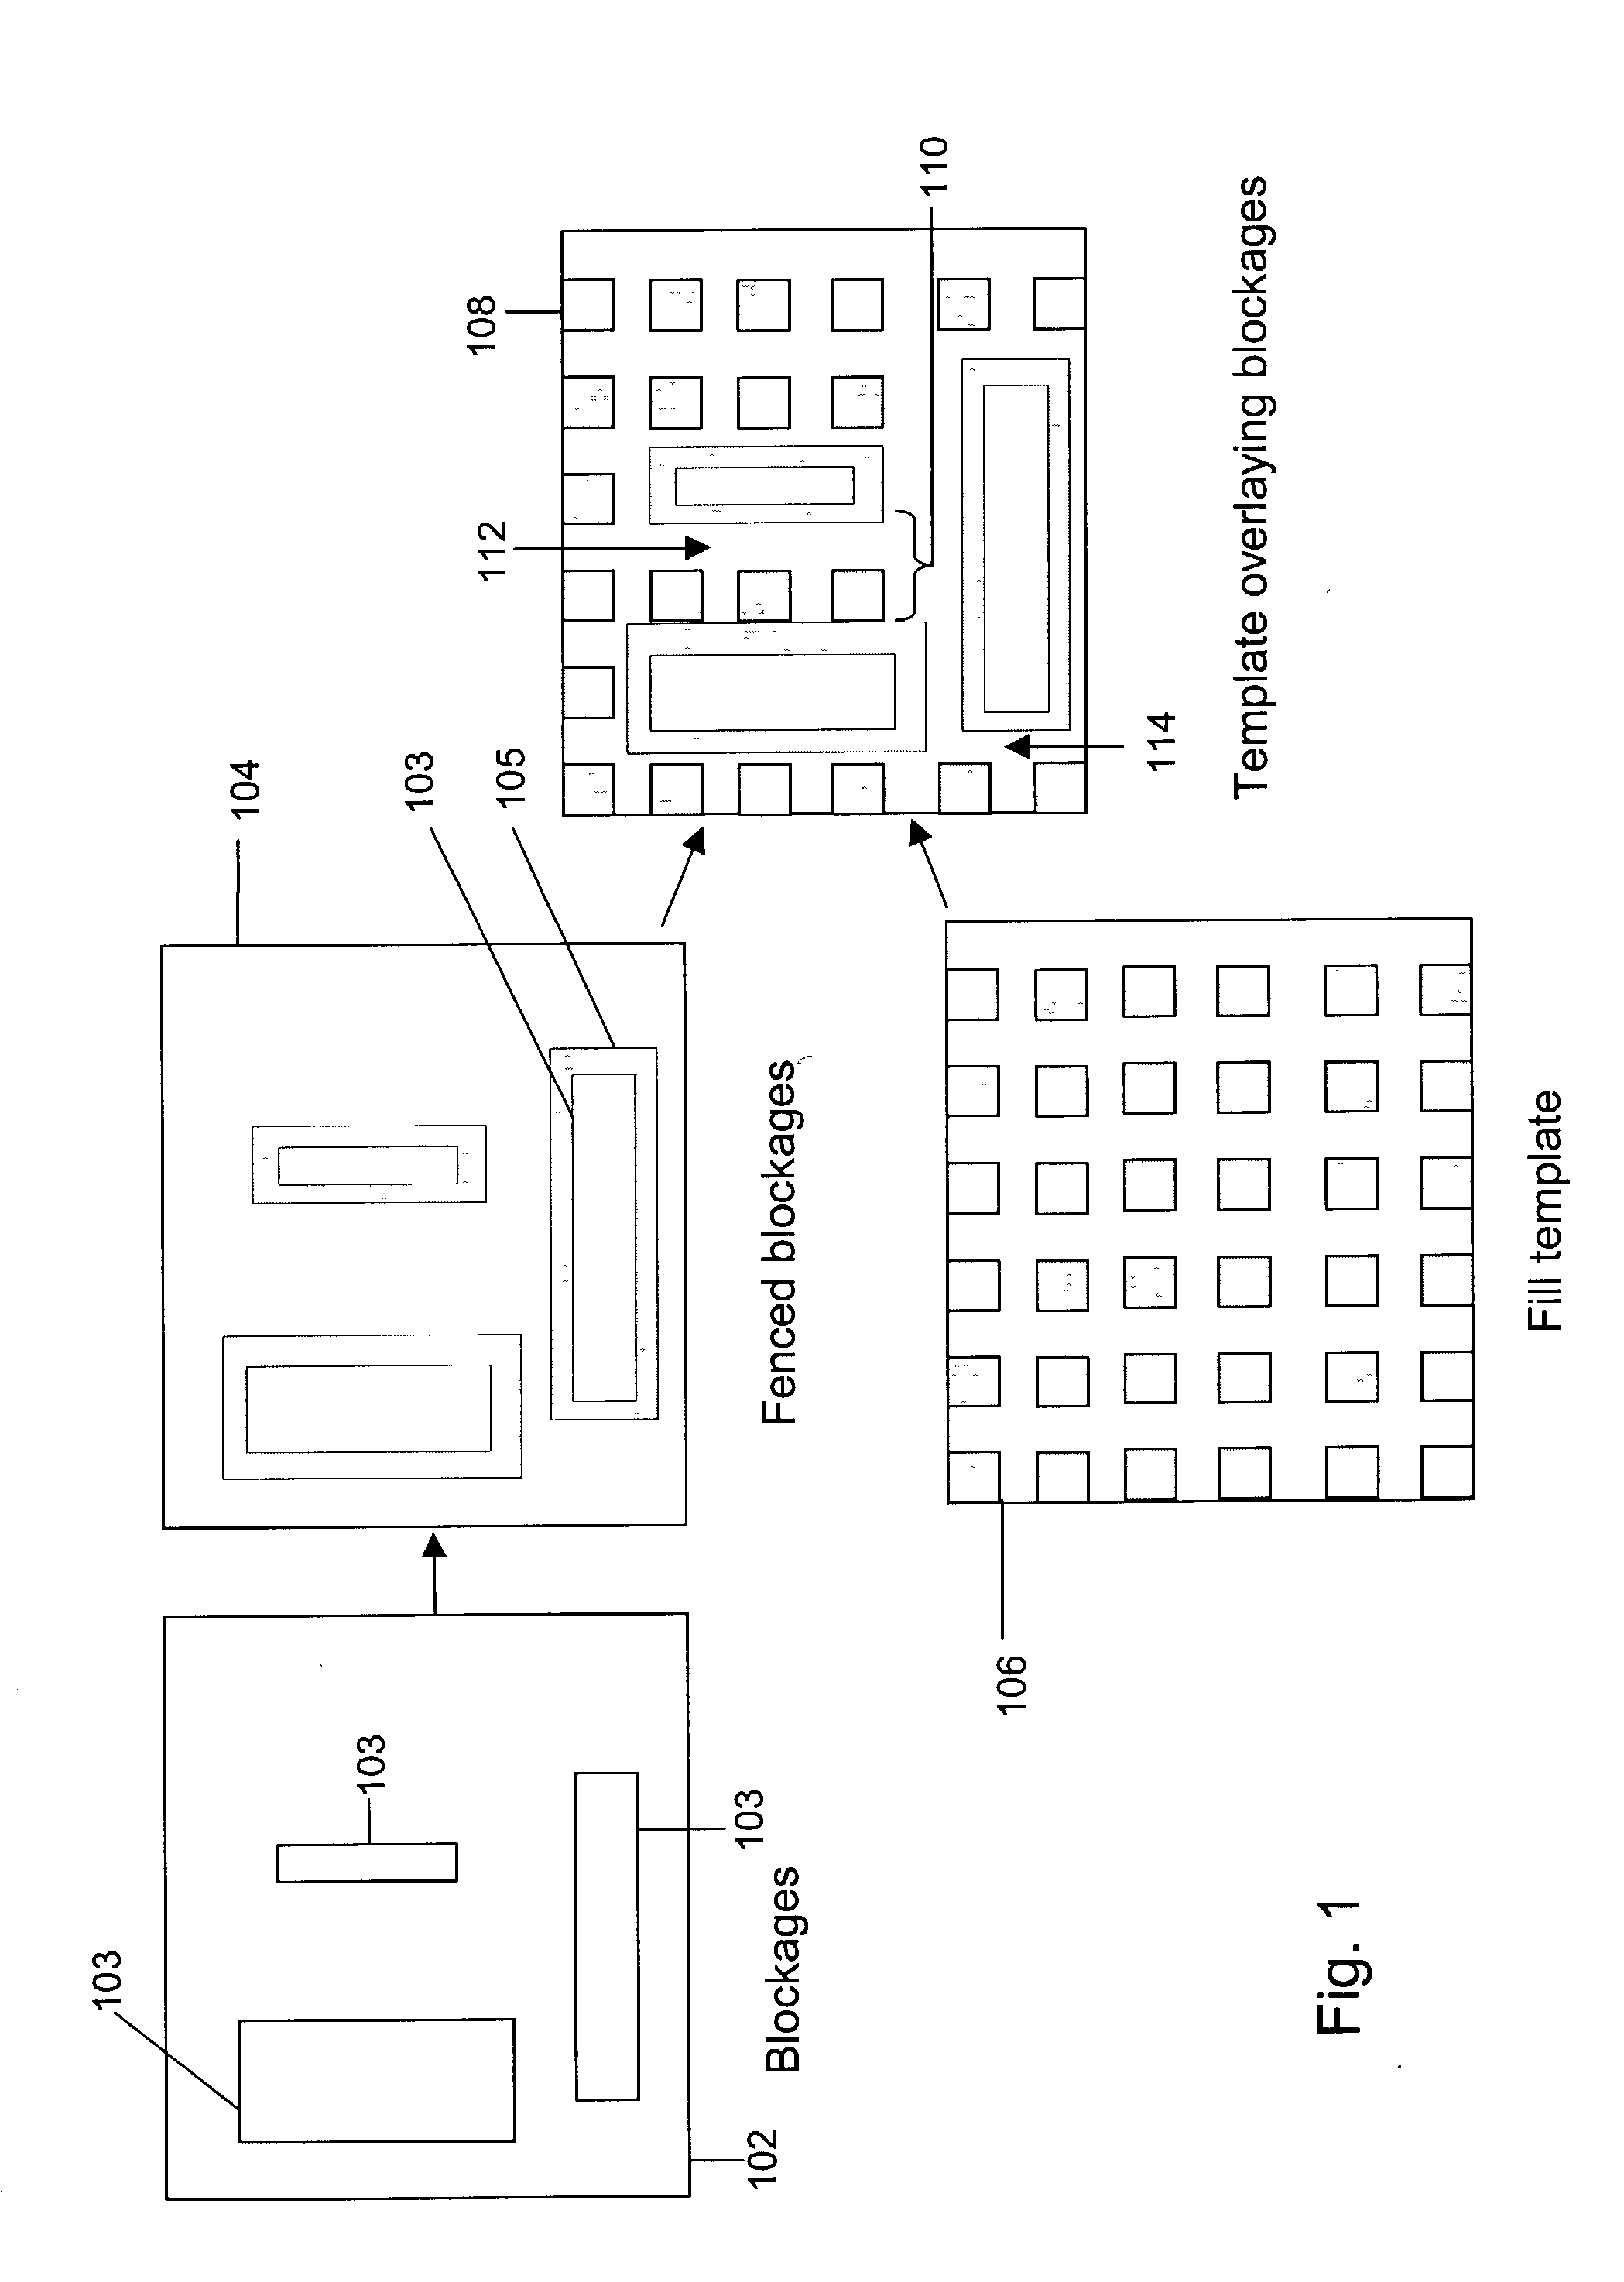 Method, system, and article of manufacture for implementing metal-fill with power or ground connection